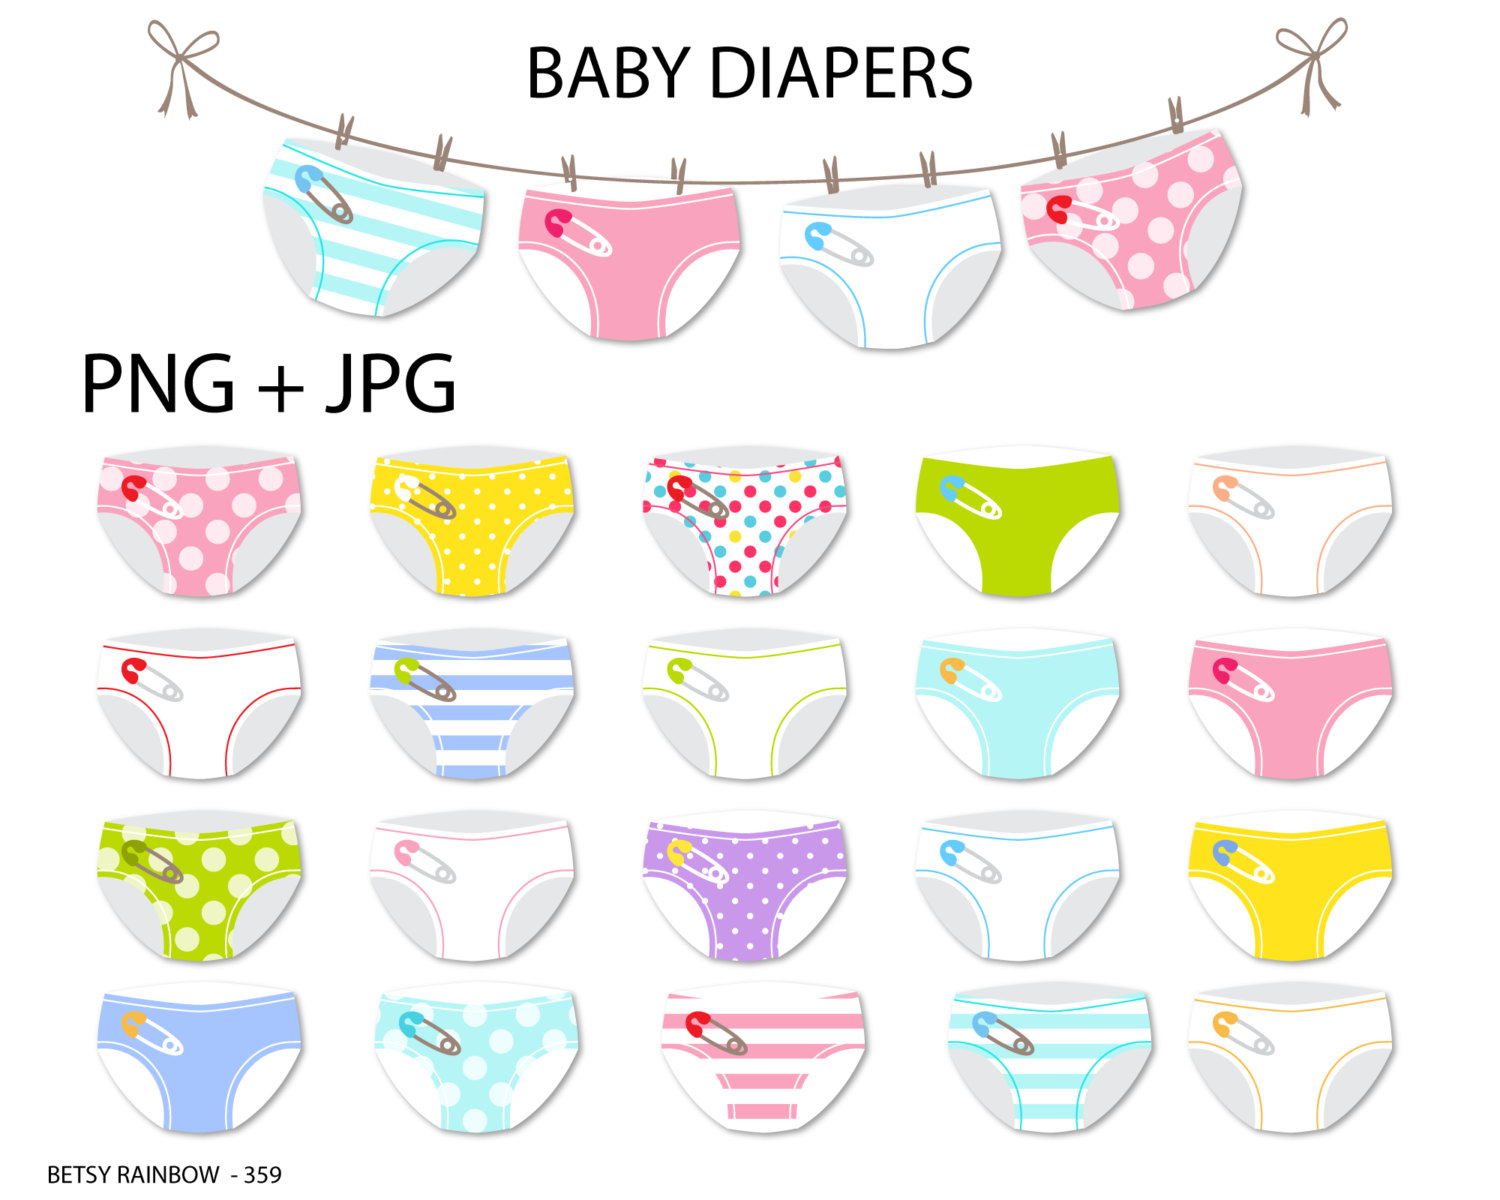 Baby diaper clipart cliparts Baby diapers clip art by BetsyRainbow